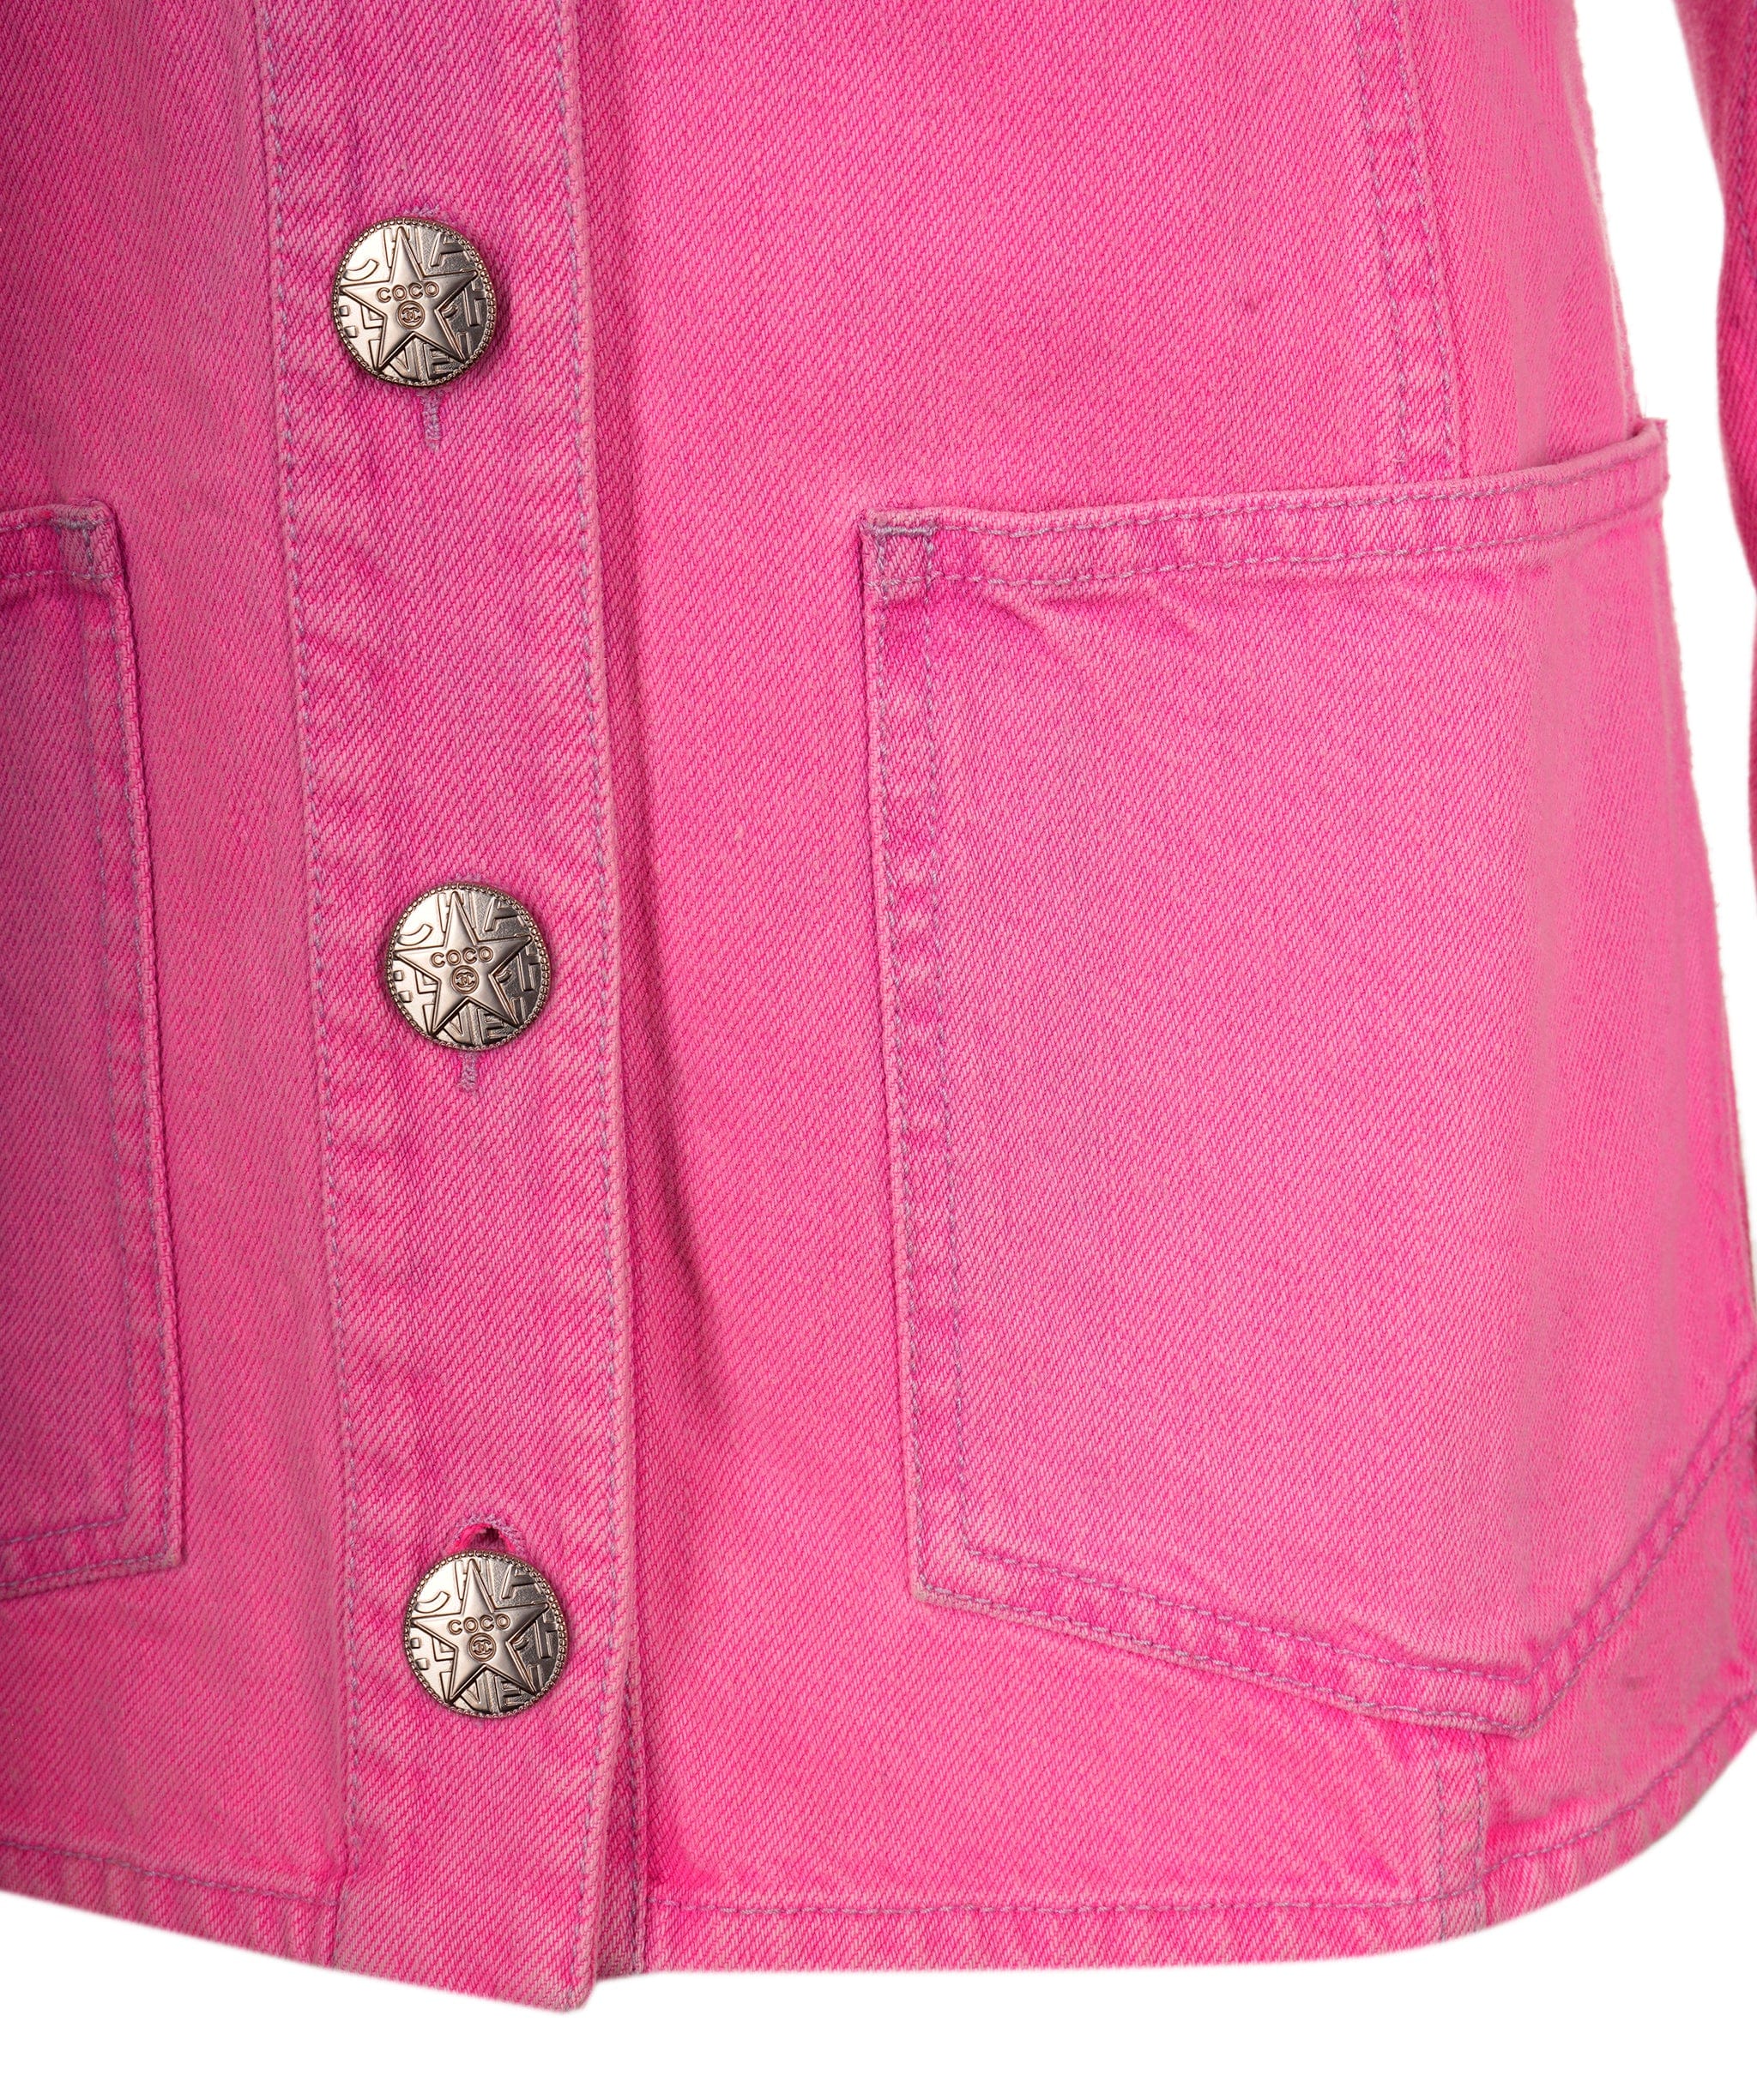 Chanel Chanel Jacket long denim neon pink with camelias 21S FR36 P70707V62121 AVC1709